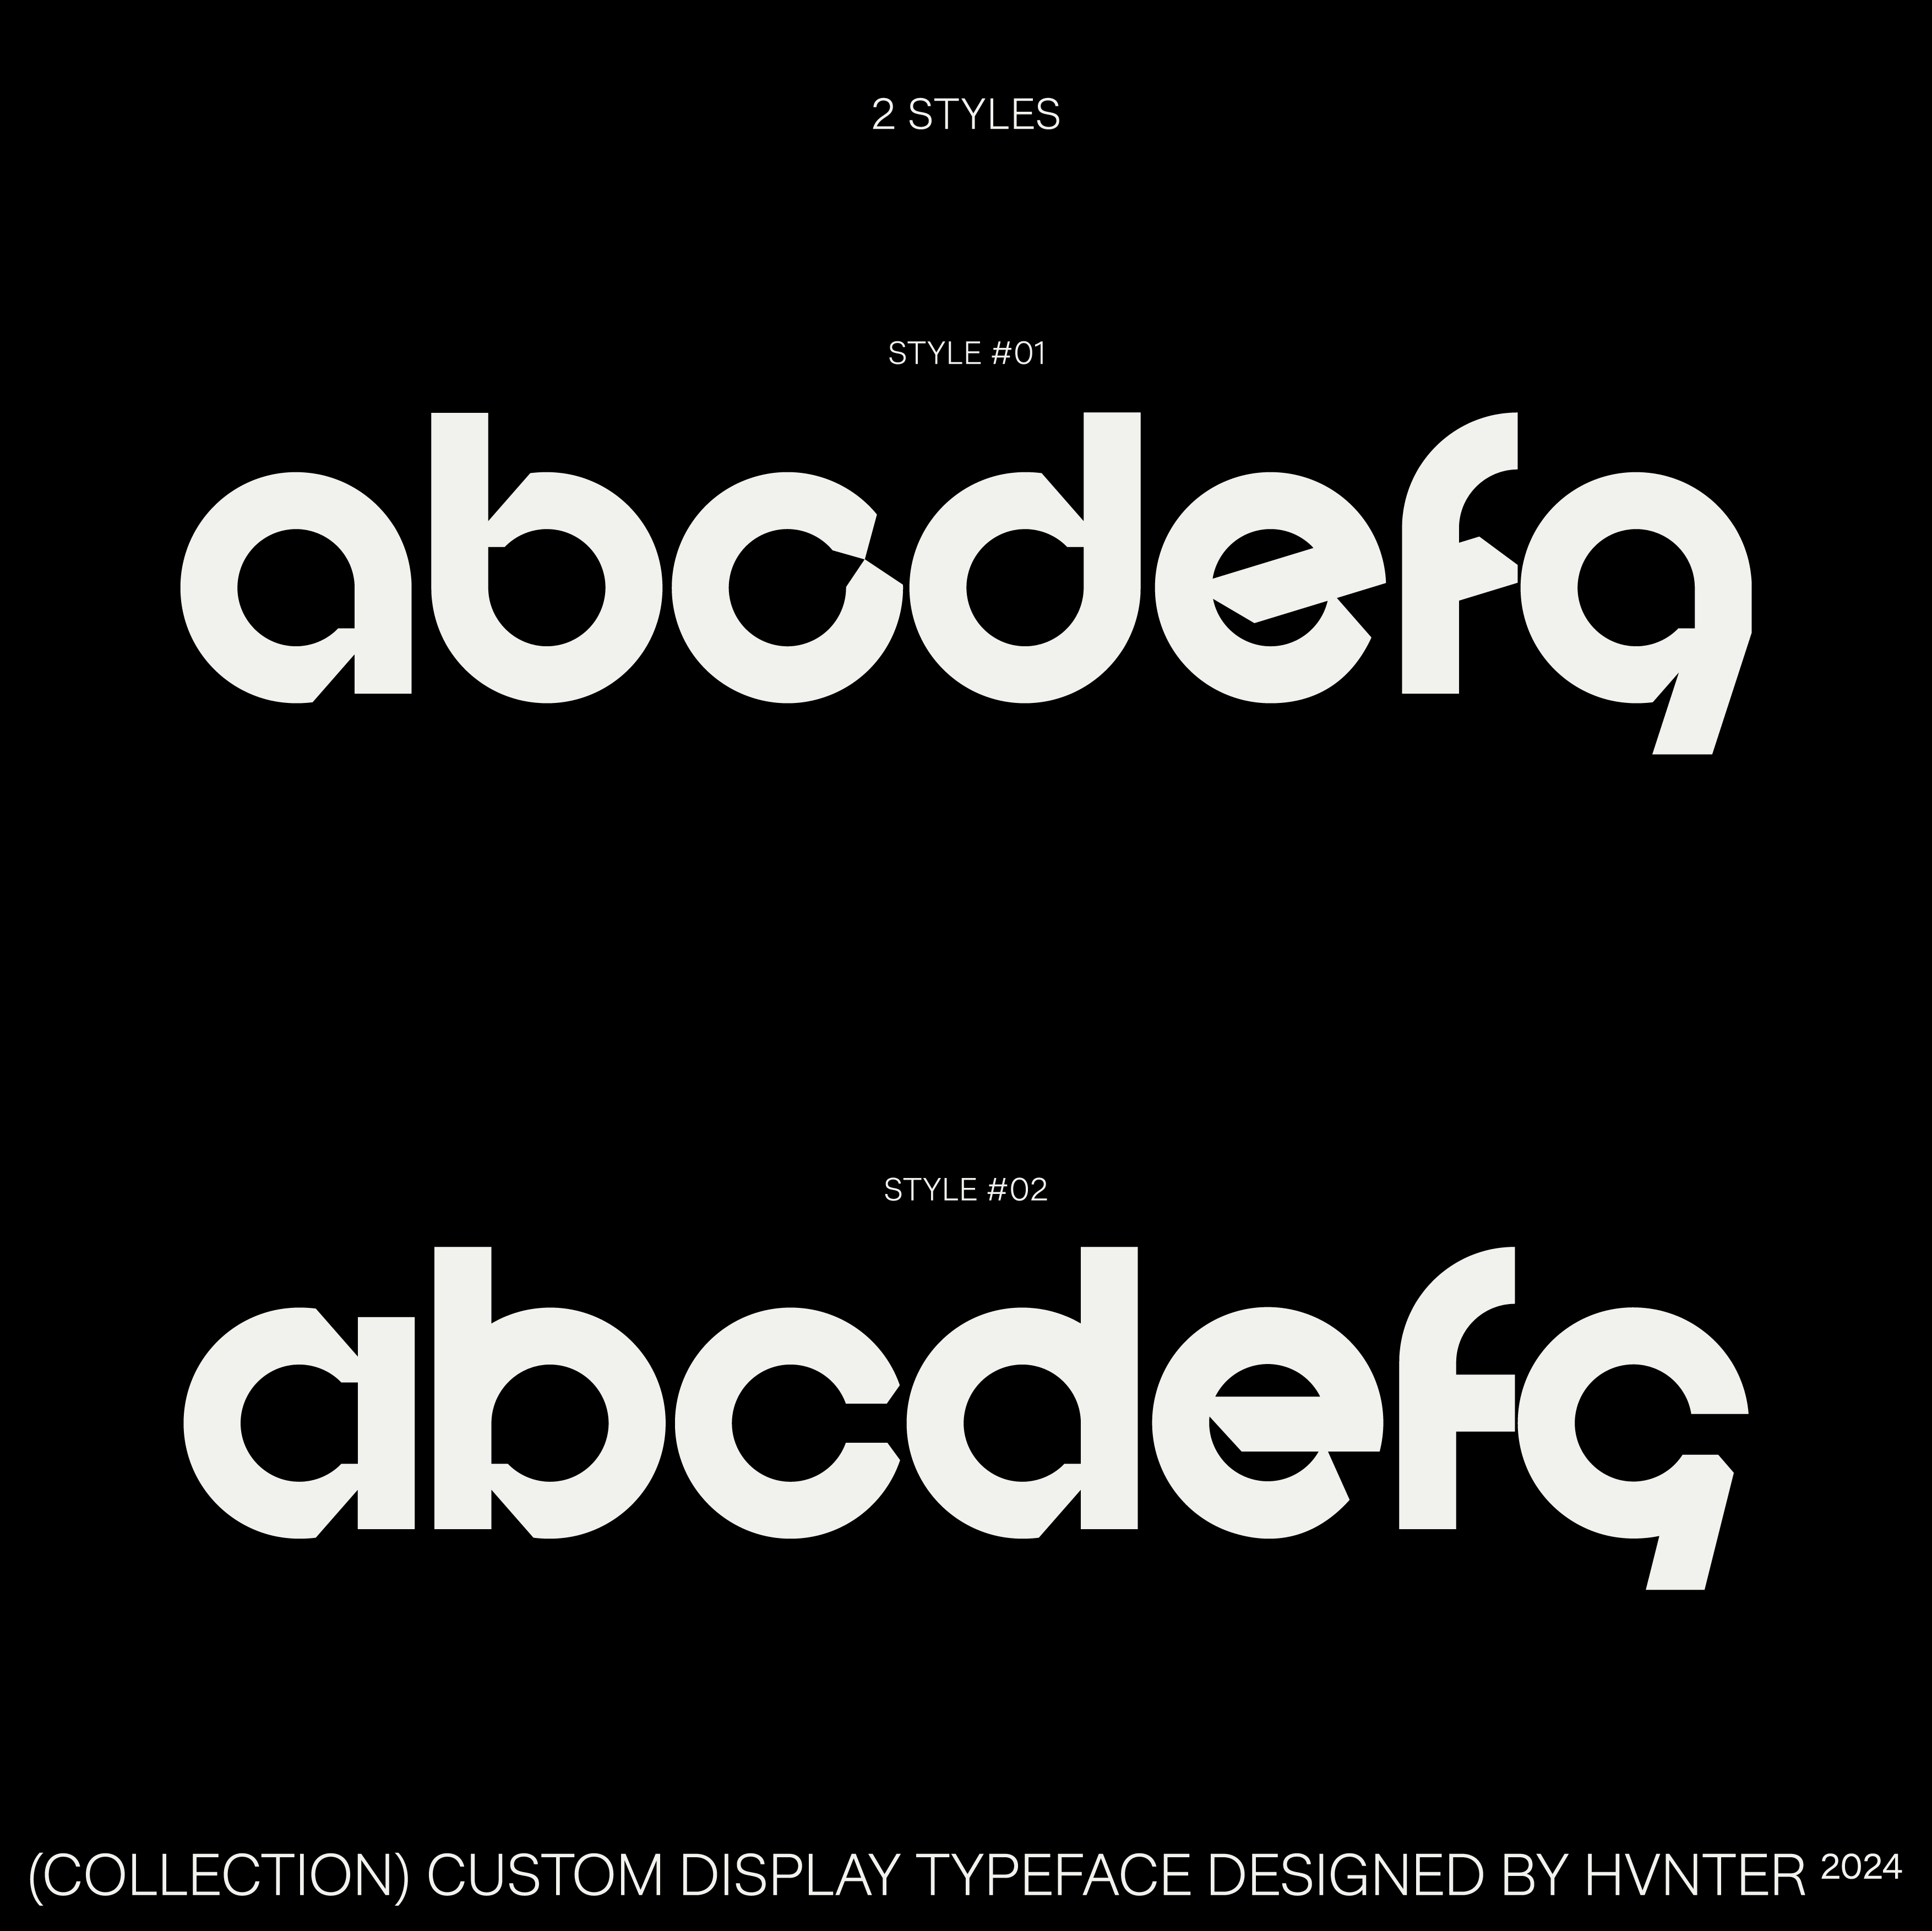 Collection Typeface